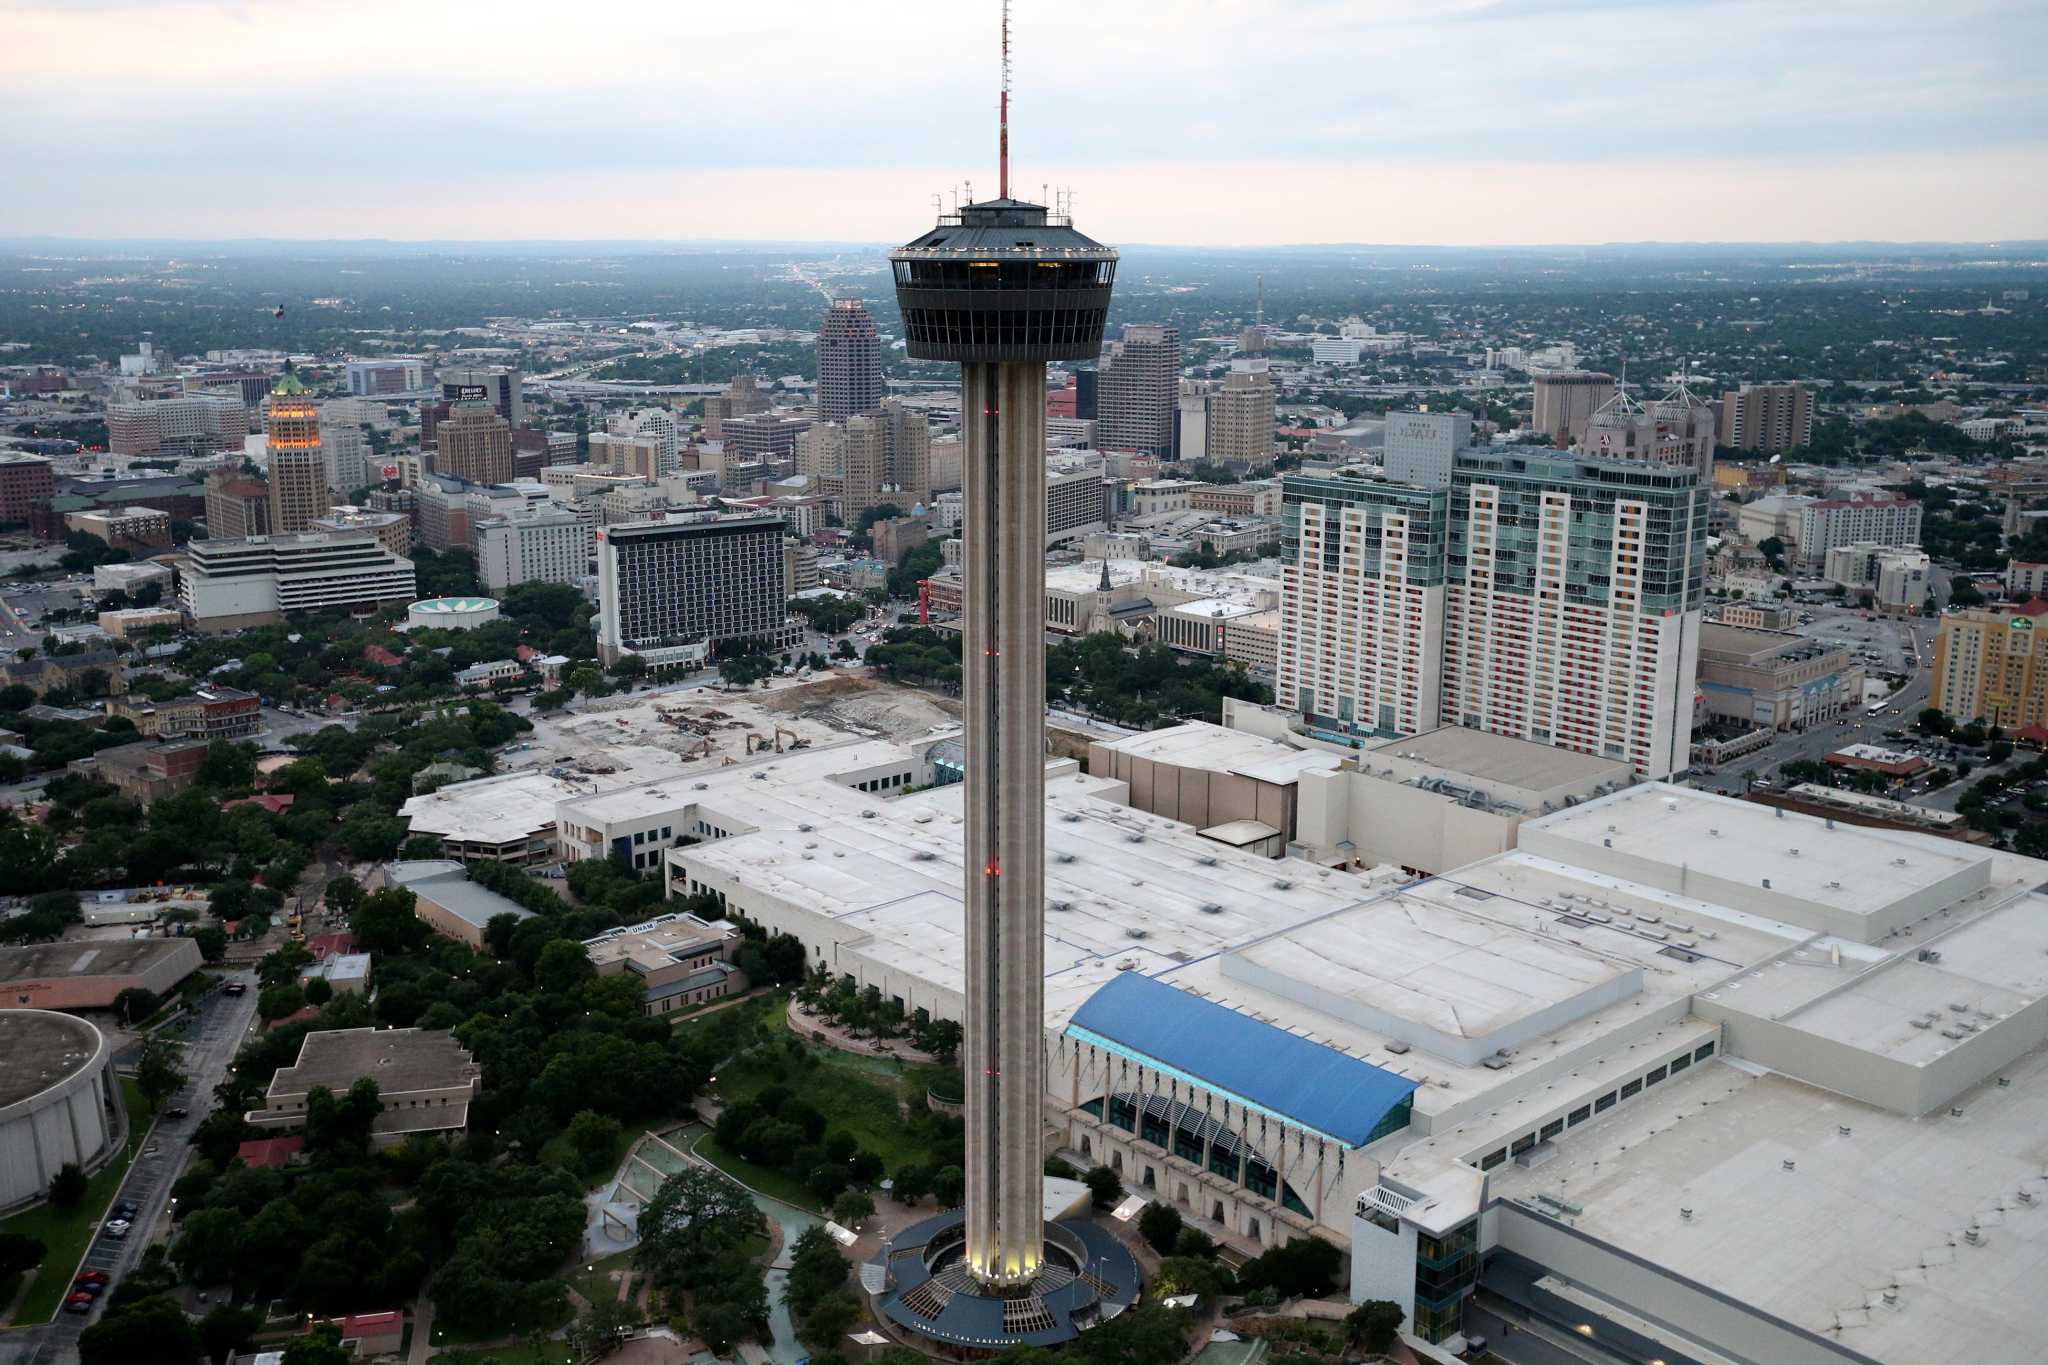 Tower of the Americas wants to hire you at their job fair